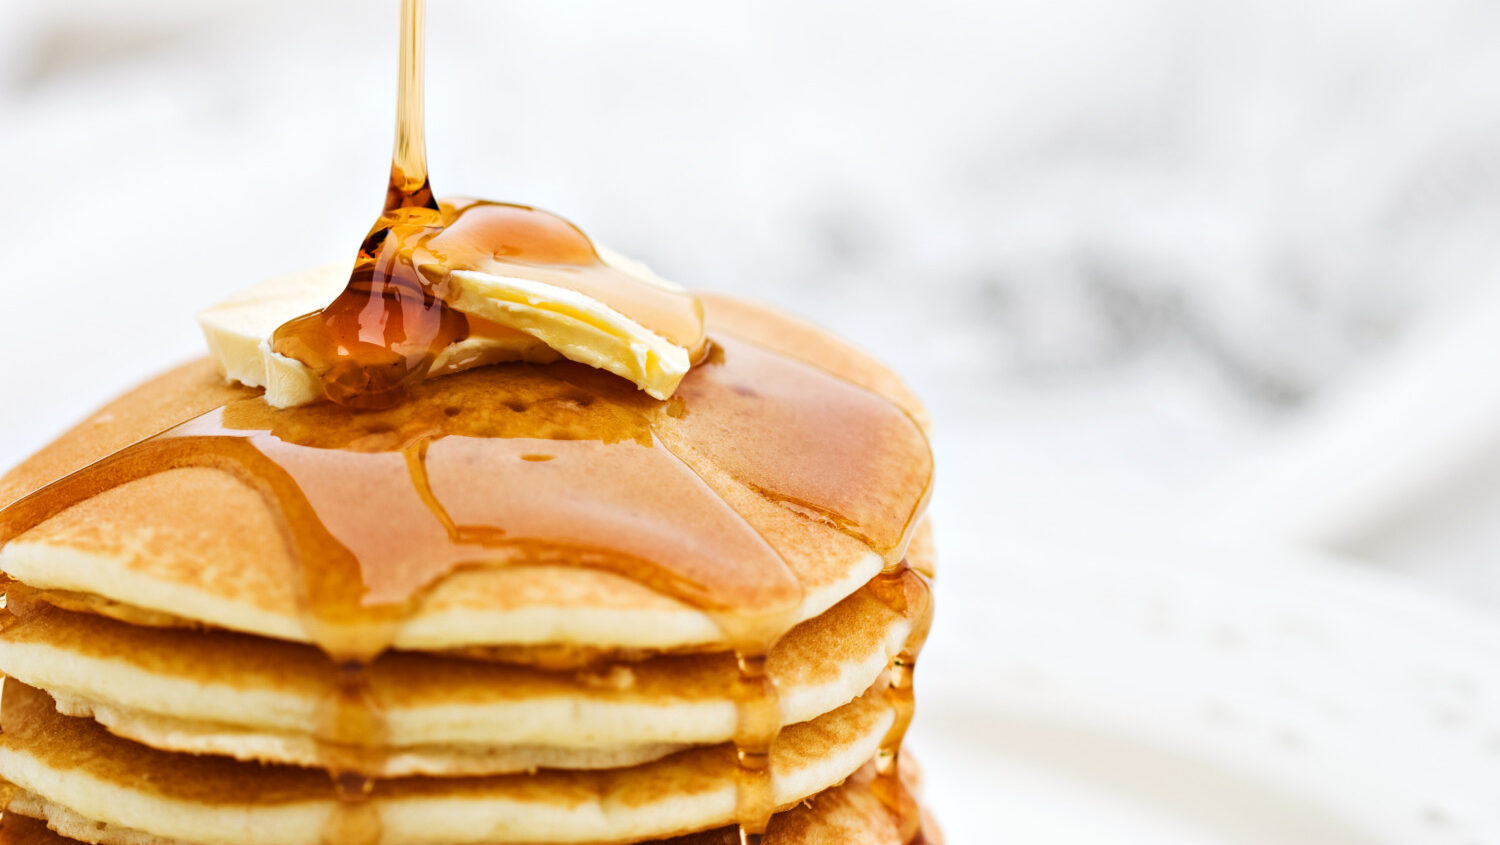 Maple syrup pouring onto pancakes